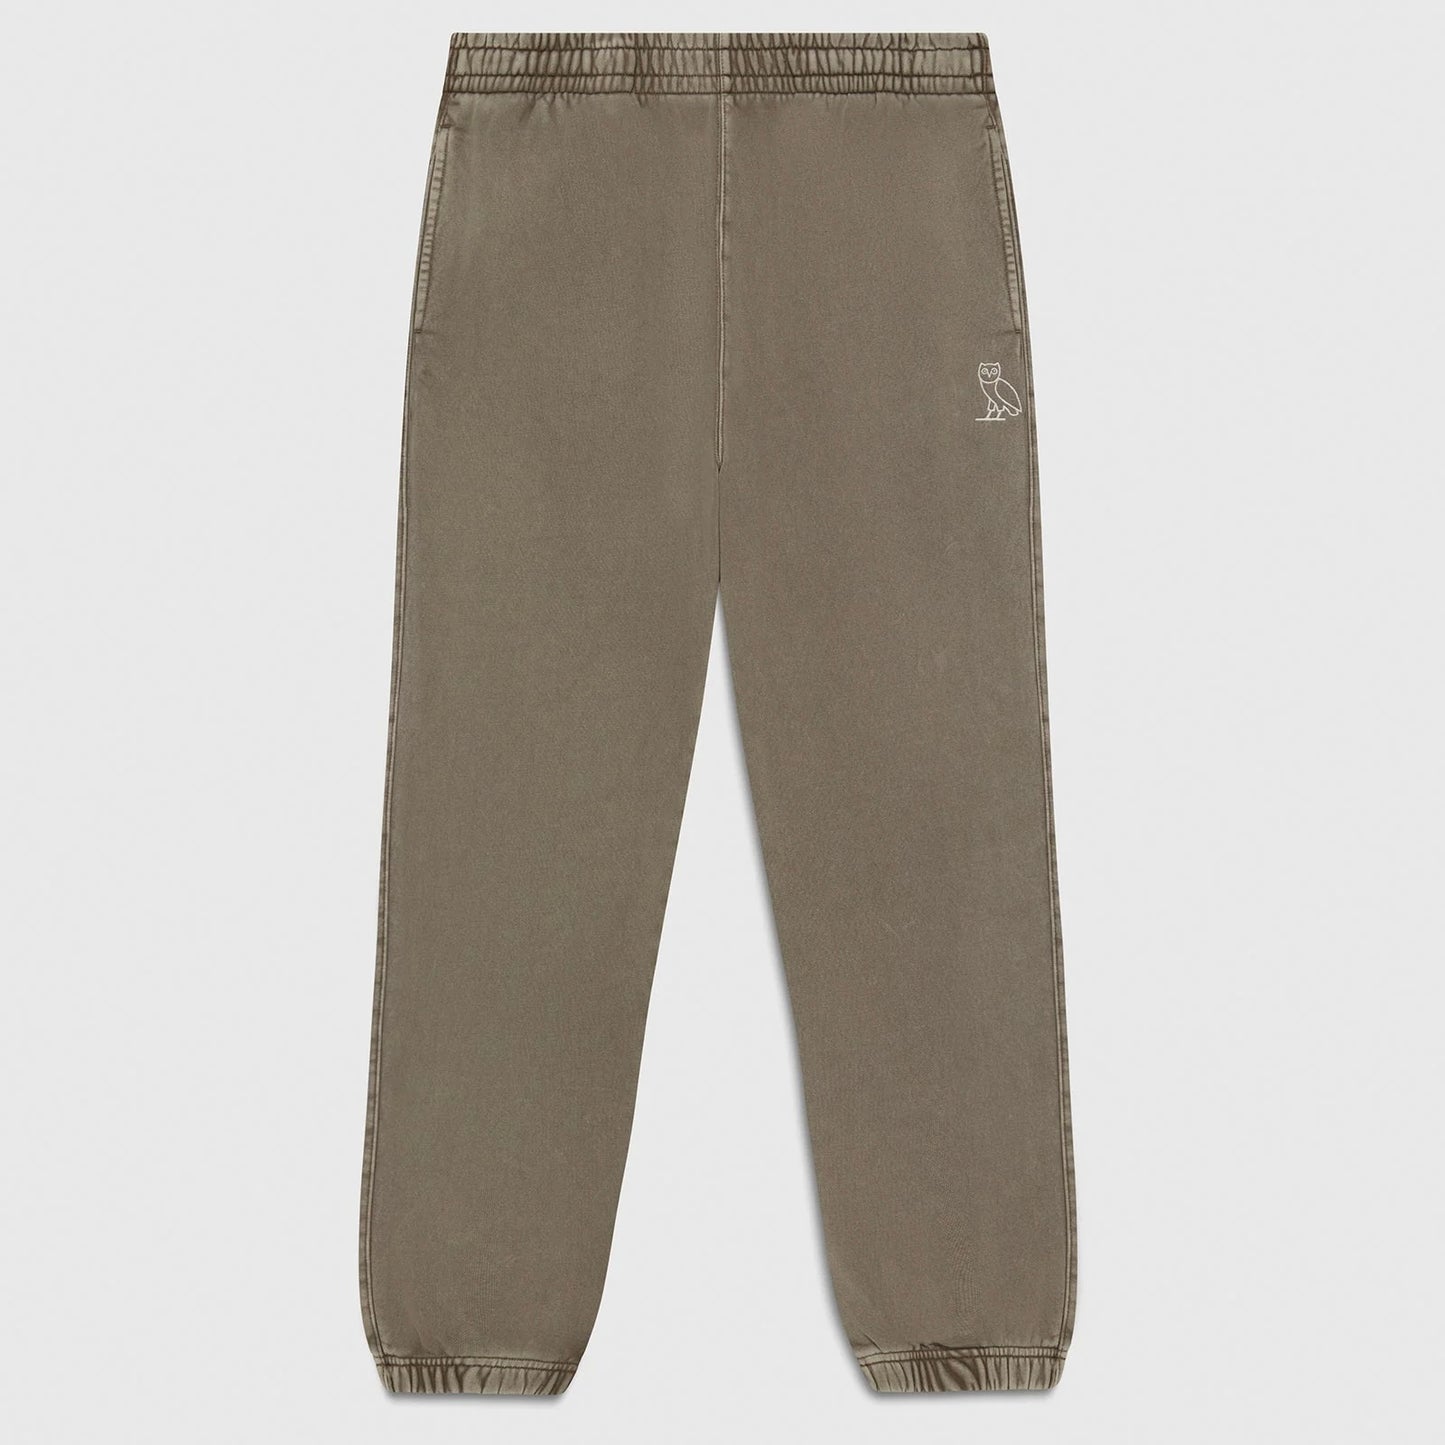 OVO Washed Brown Sweatpants Front VIew